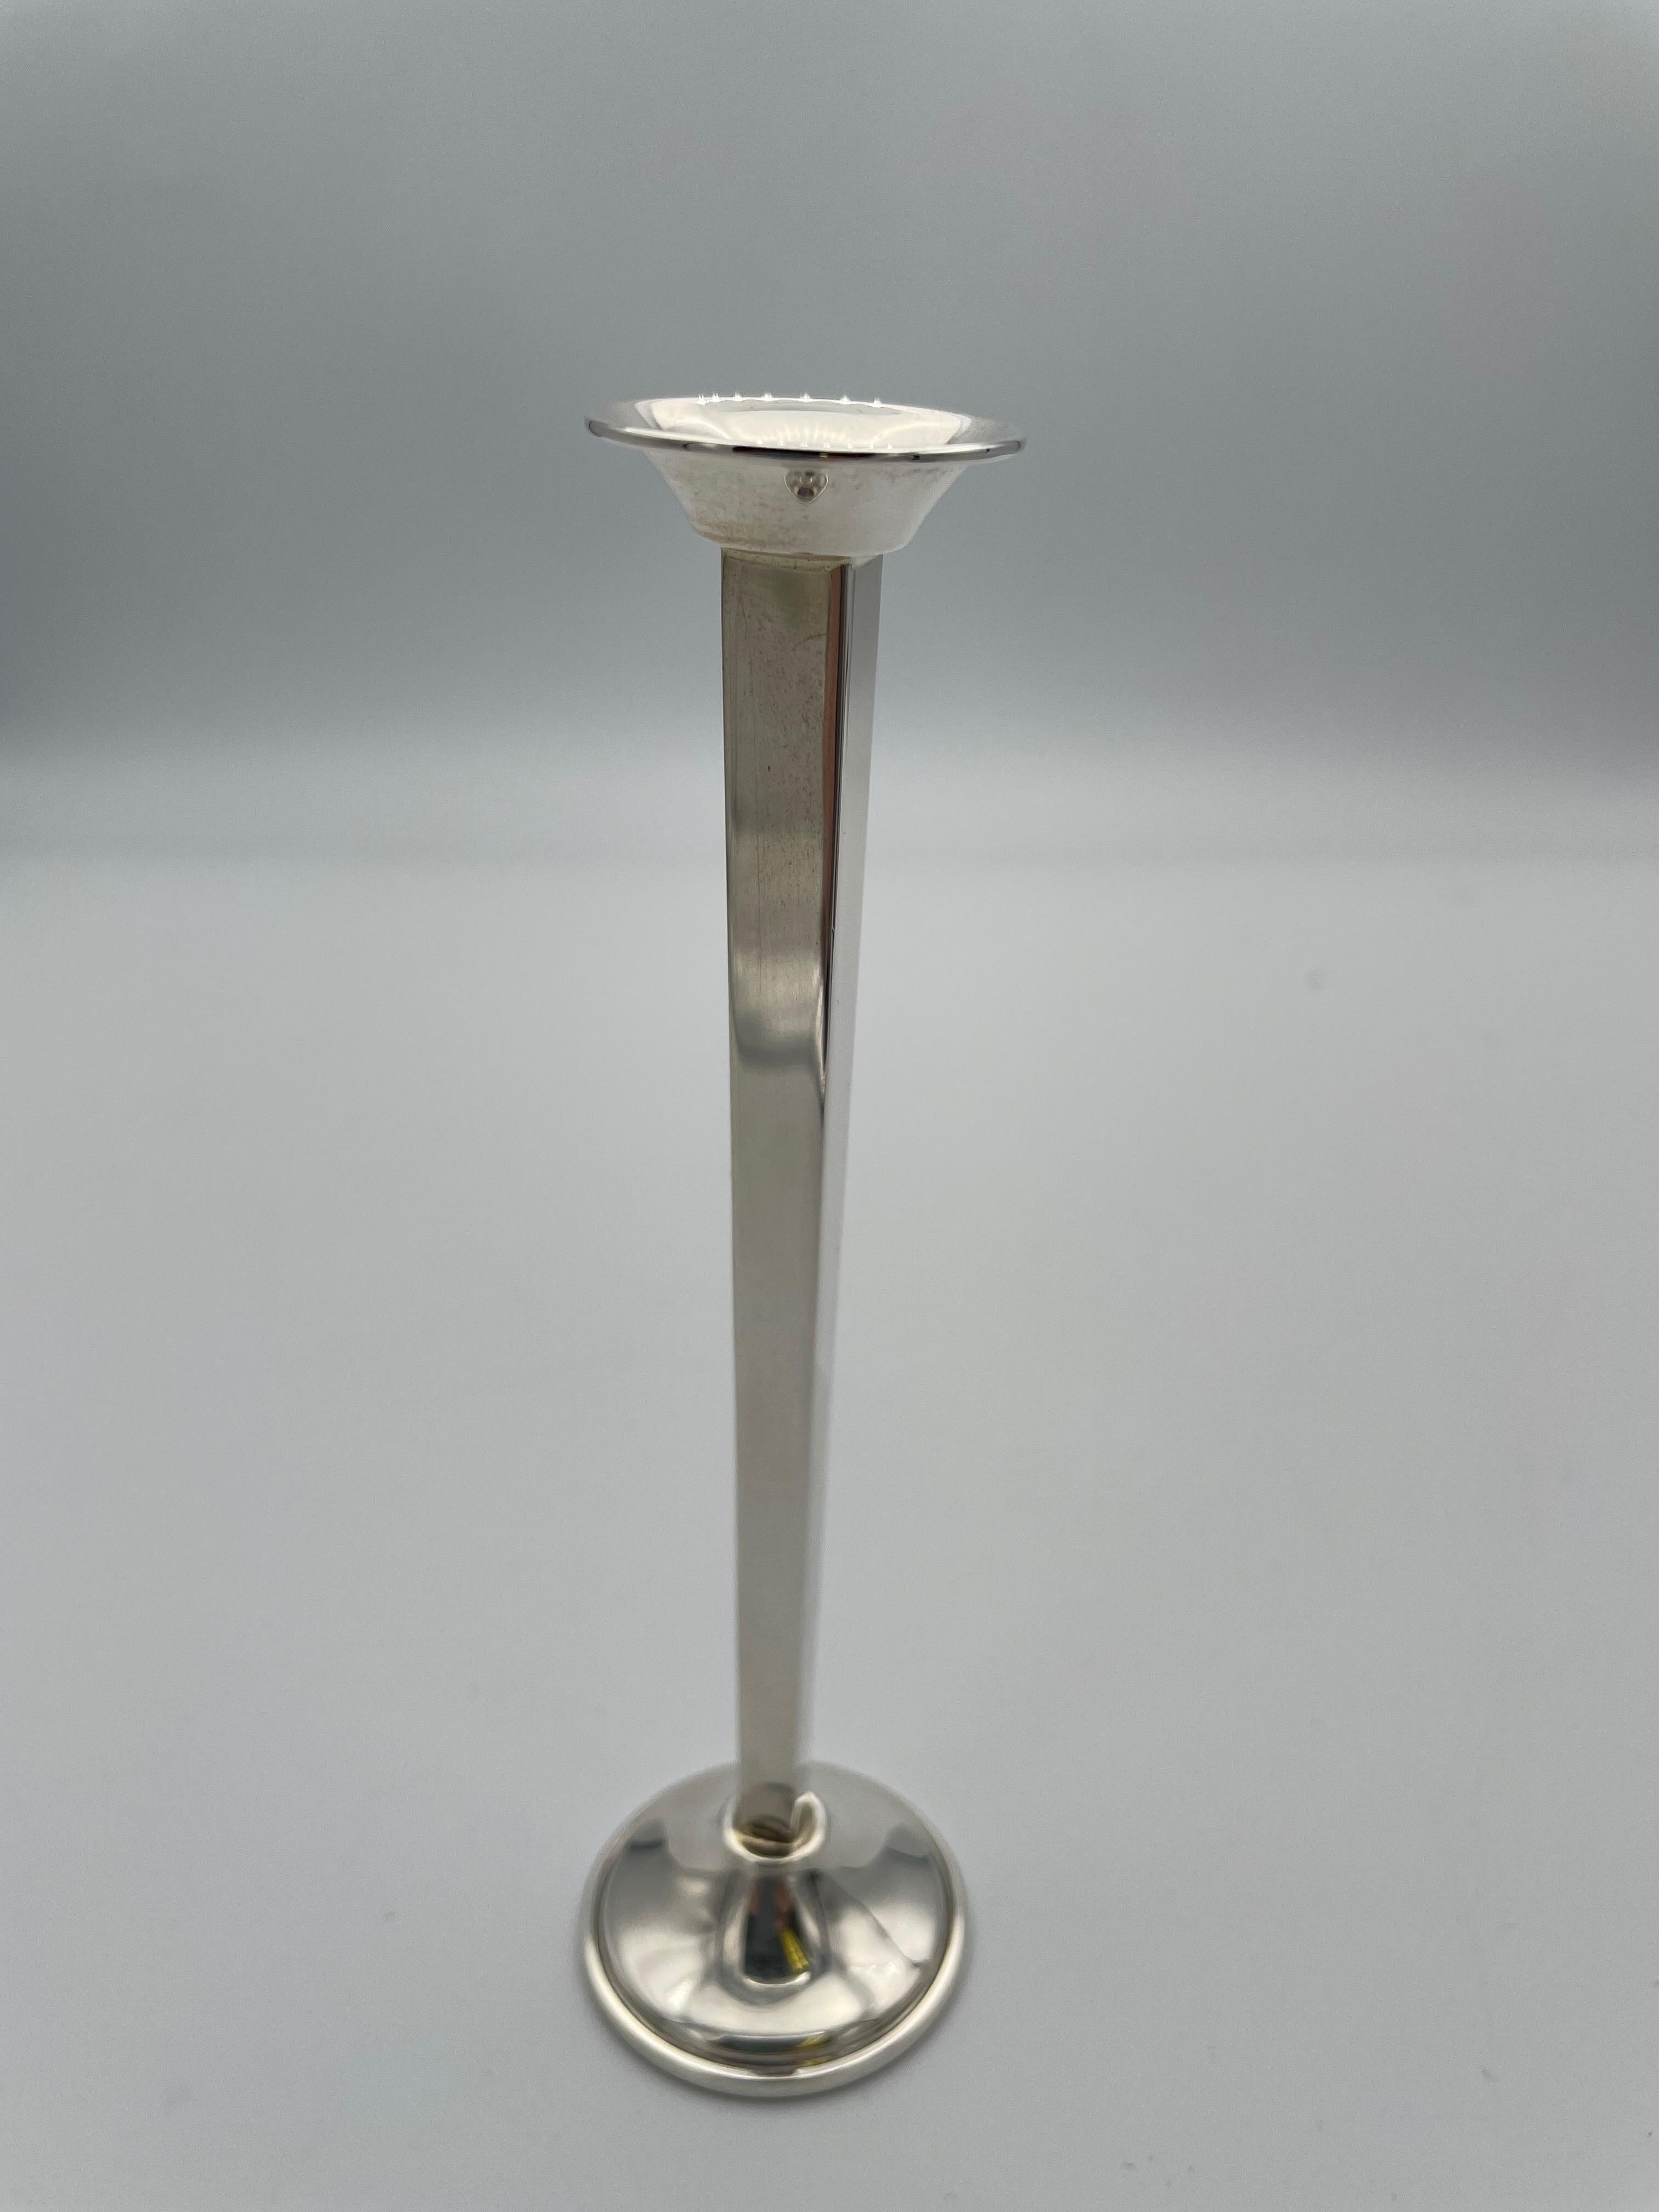 A slim elegant sterling silver bud vase.  Made and signed by CARTIER.  Faceted, with flaring rim and base.  5 1/2